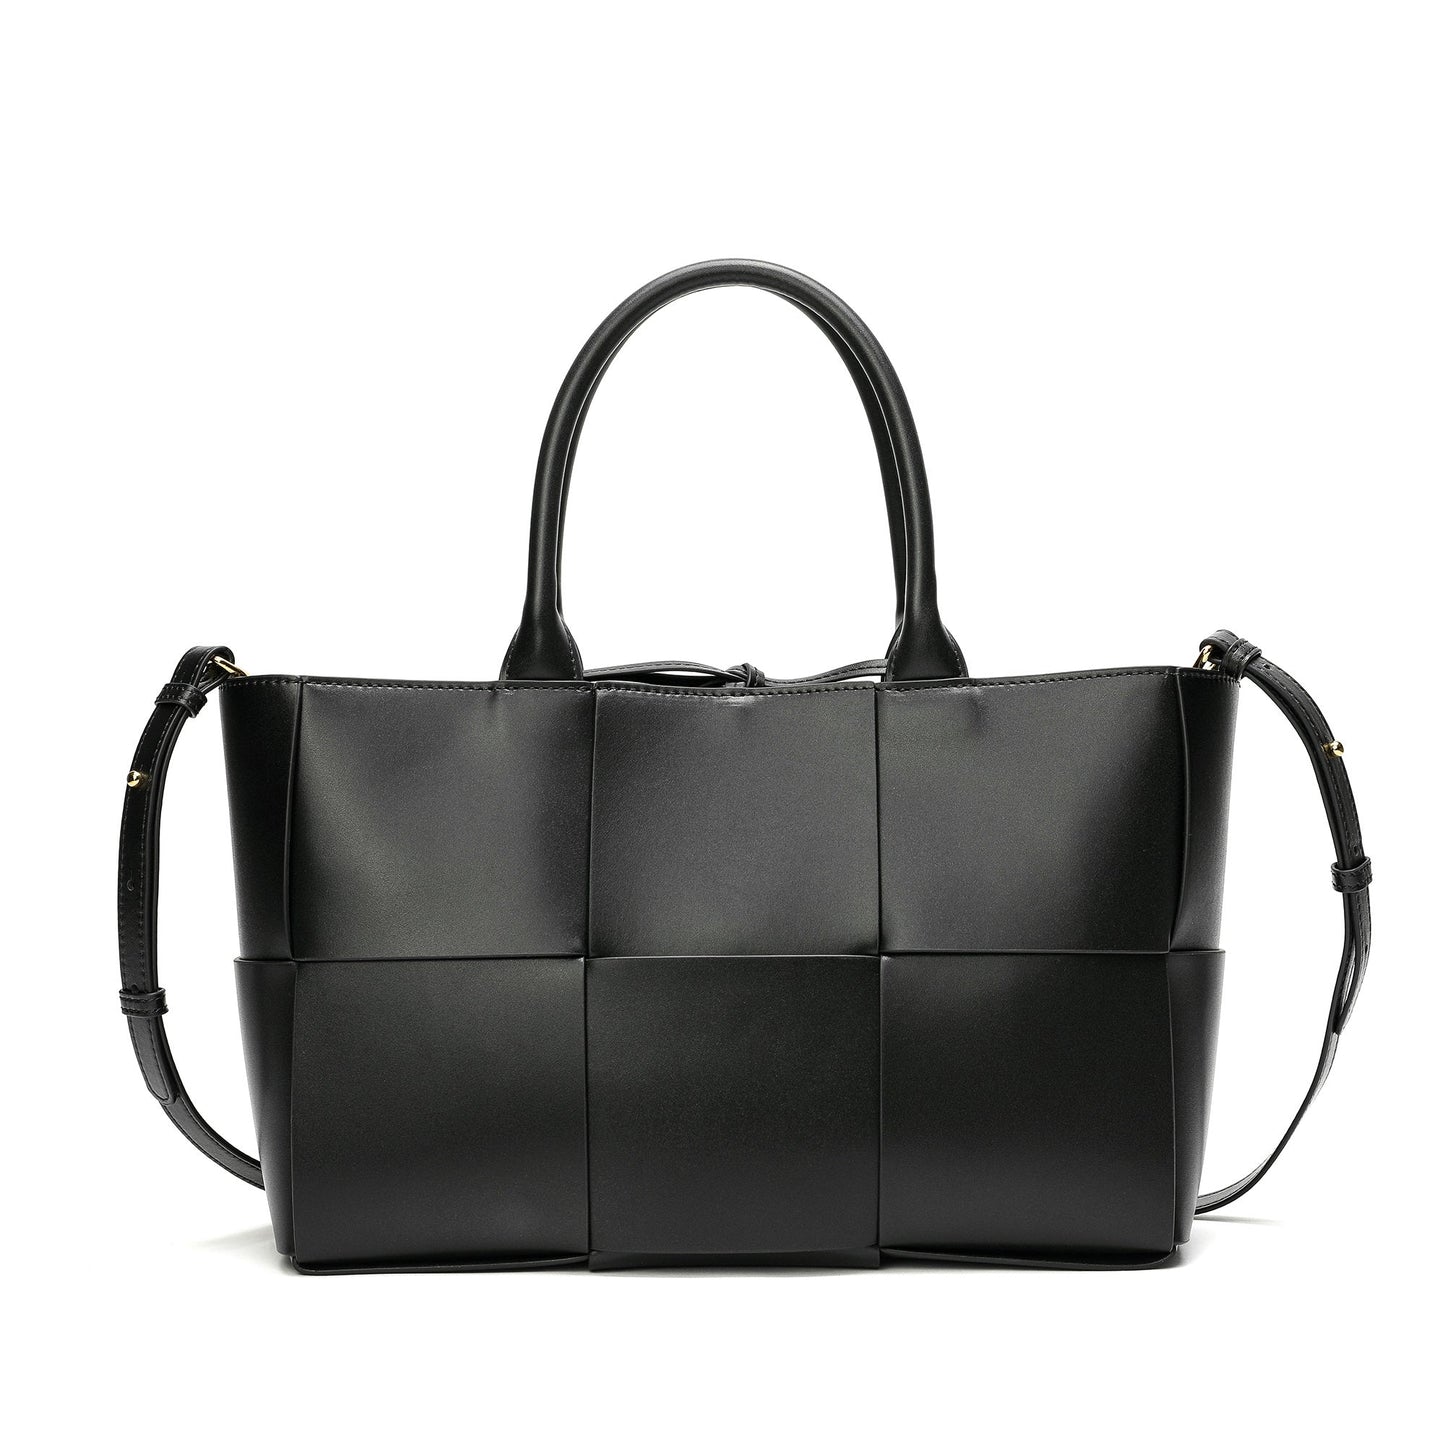 Woven Smooth Leather Tote Bag